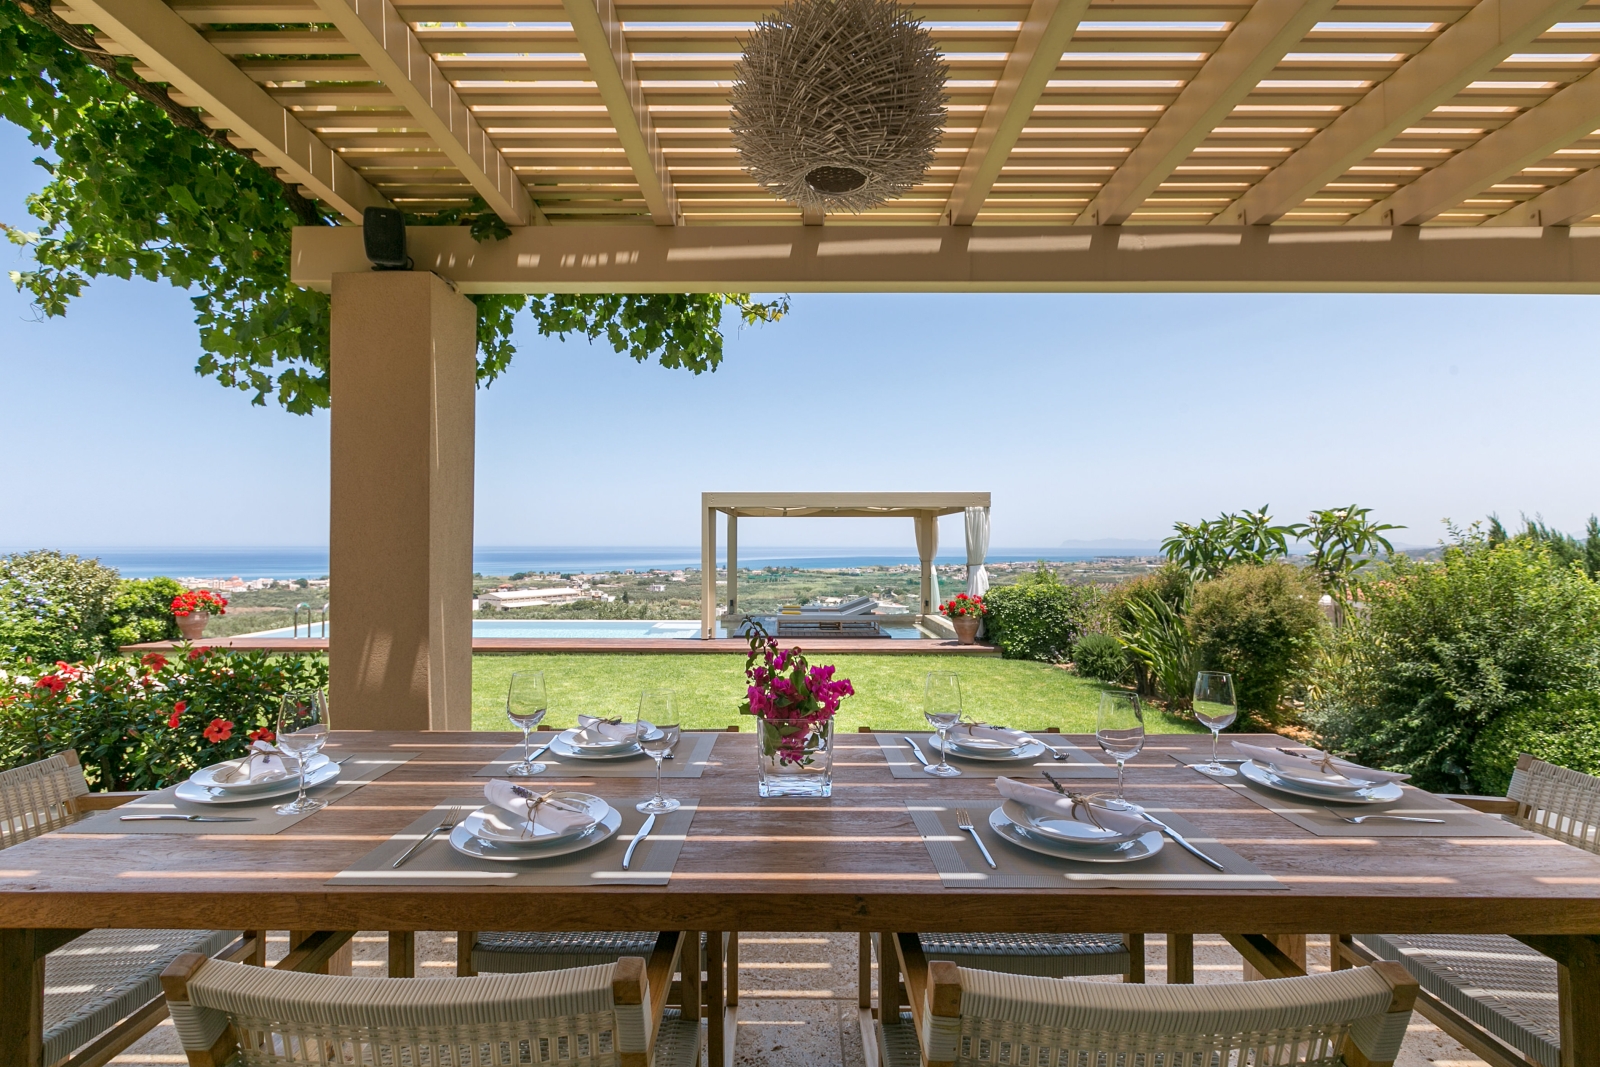 Covered outdoor dining area with table, chairs, crockery, flowers and view of pool and sea at Villa Filira on Crete, Greece